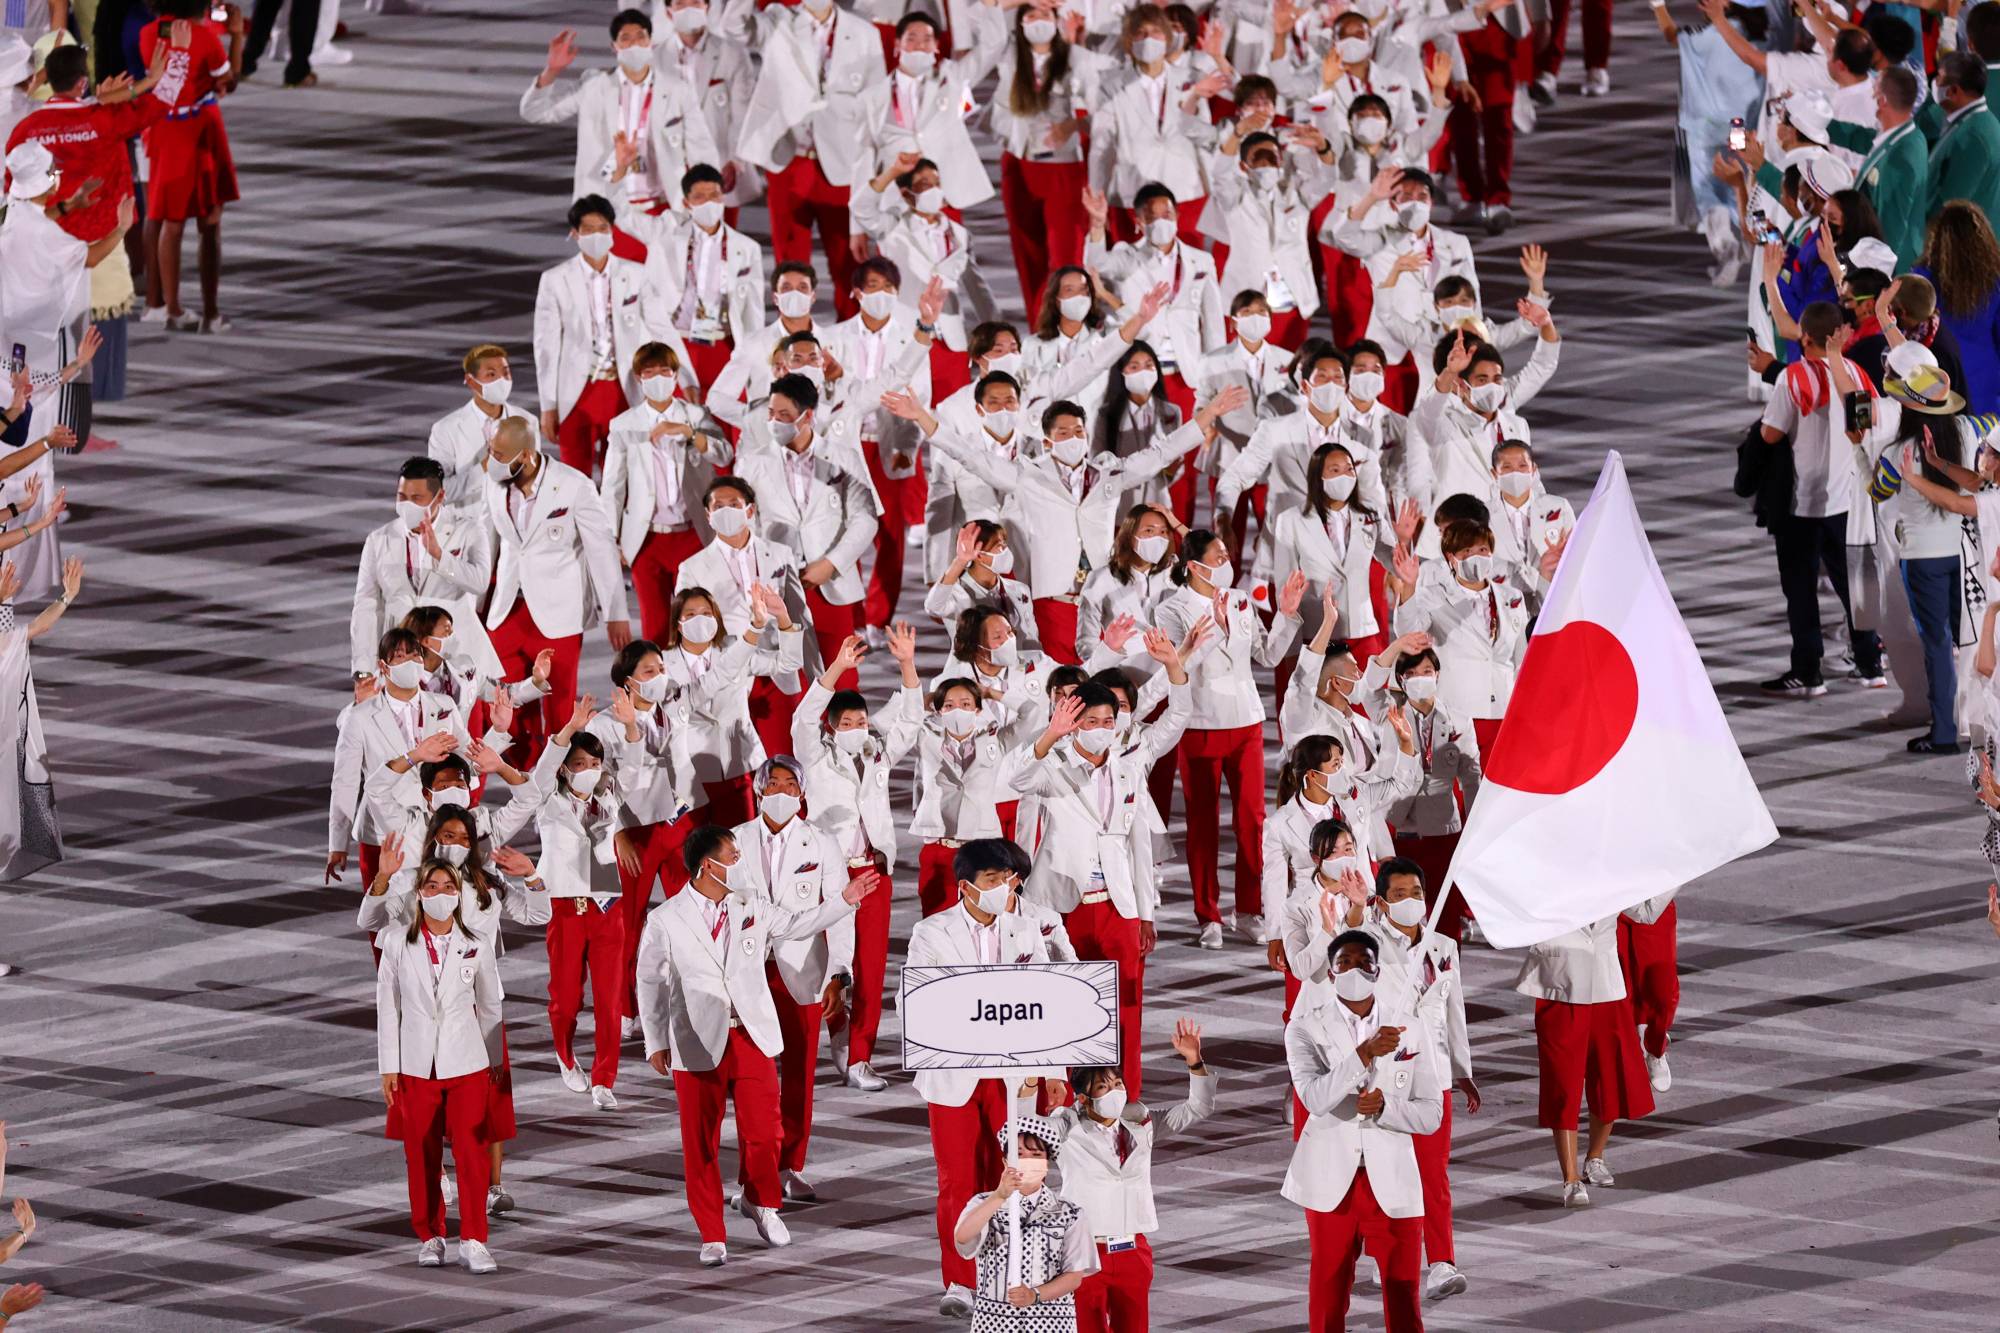 Members of Japan's Olympic delegation walk into the National Stadium during the opening ceremony of the Tokyo Games on July 23. | REUTERS